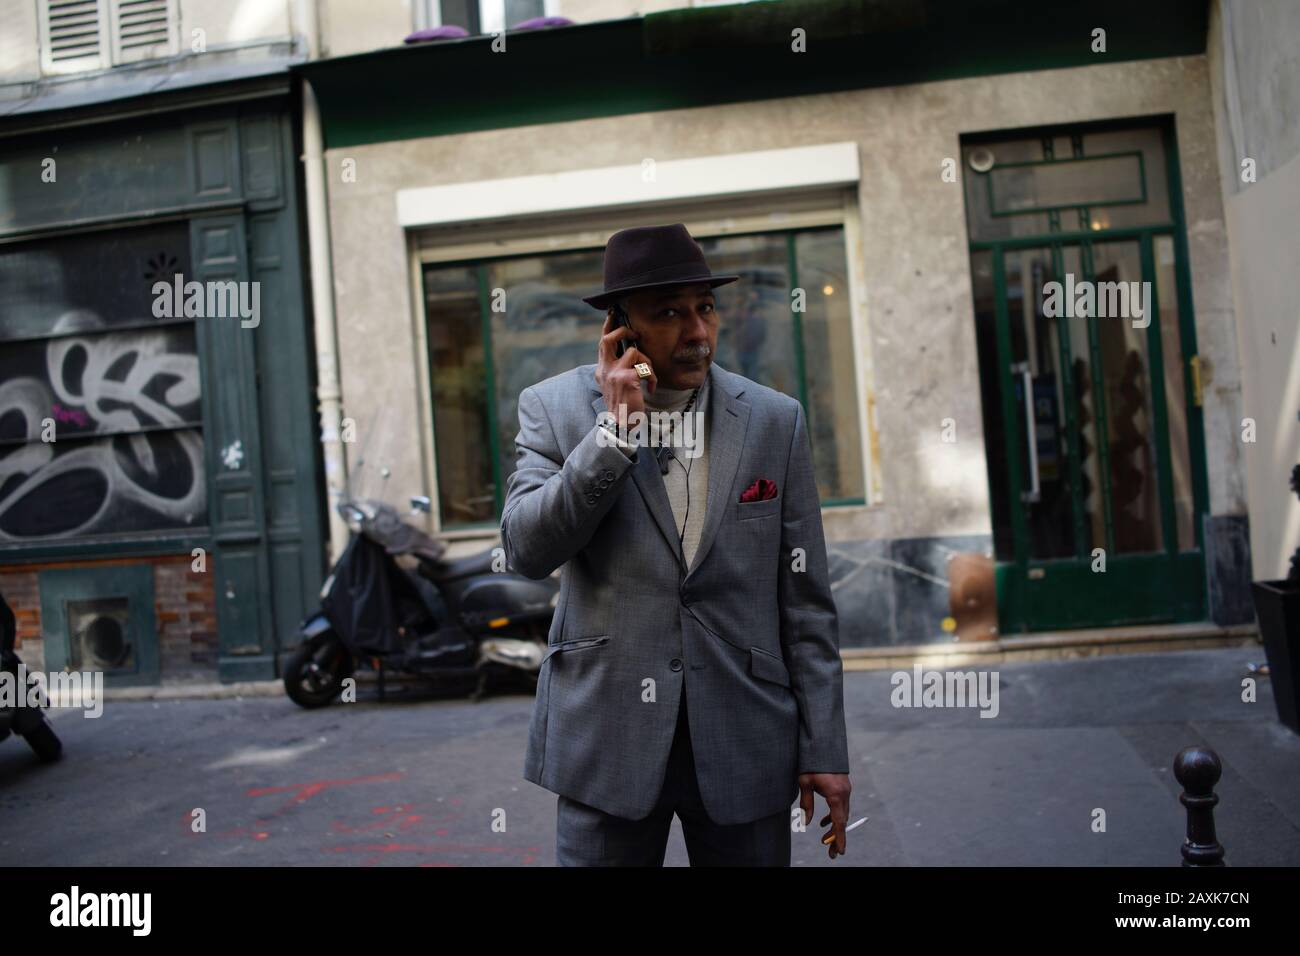 Man in grey suit and hat holding mobile phone to ear, smoking - street photo Stock Photo